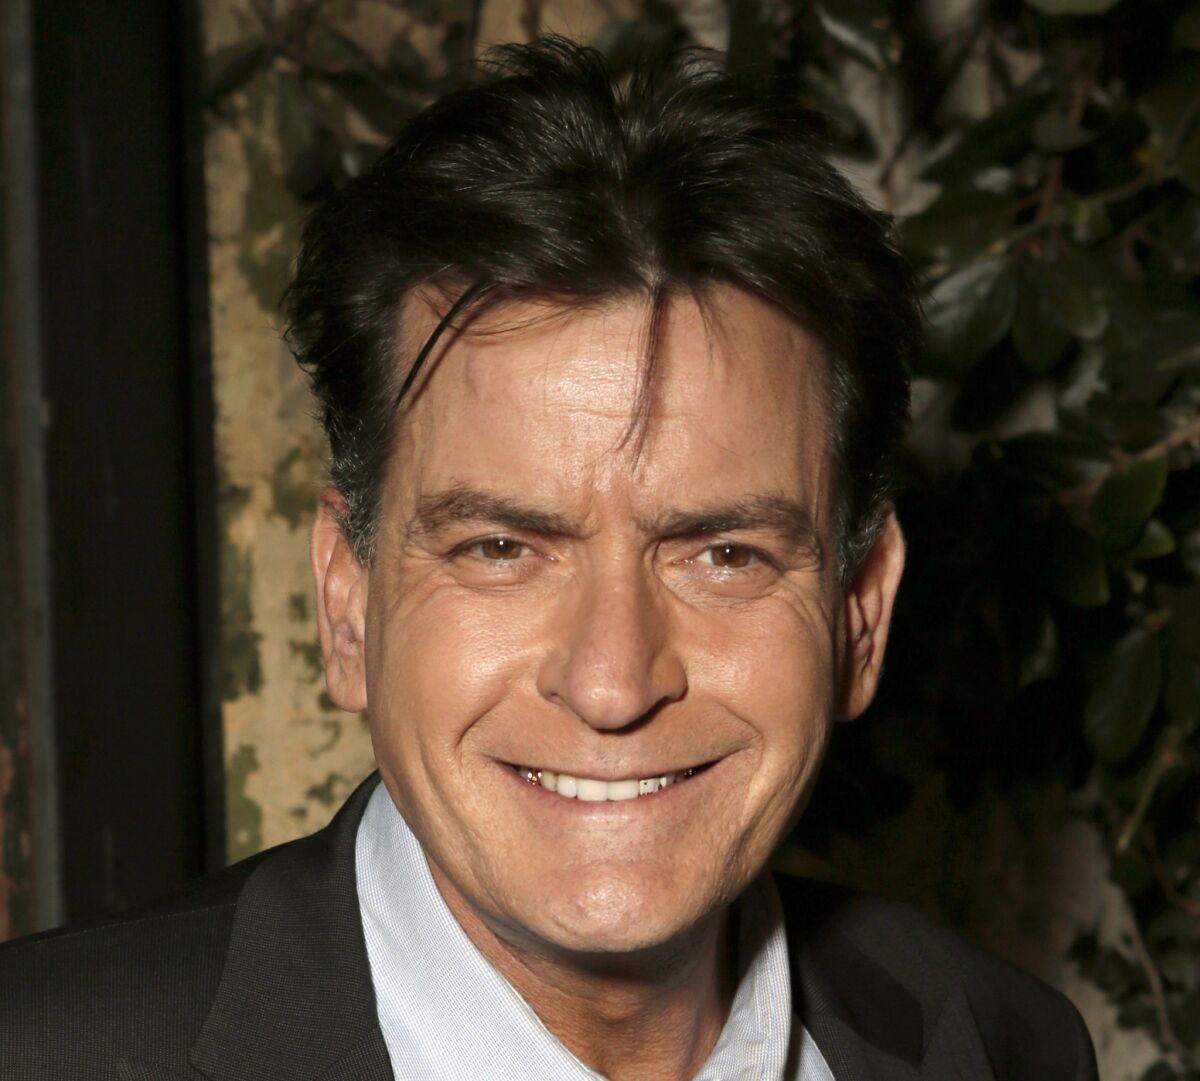 Don't look for Charlie Sheen in the "Two and a Half Men" series finale, a new report says. The actor is pictured in 2012.